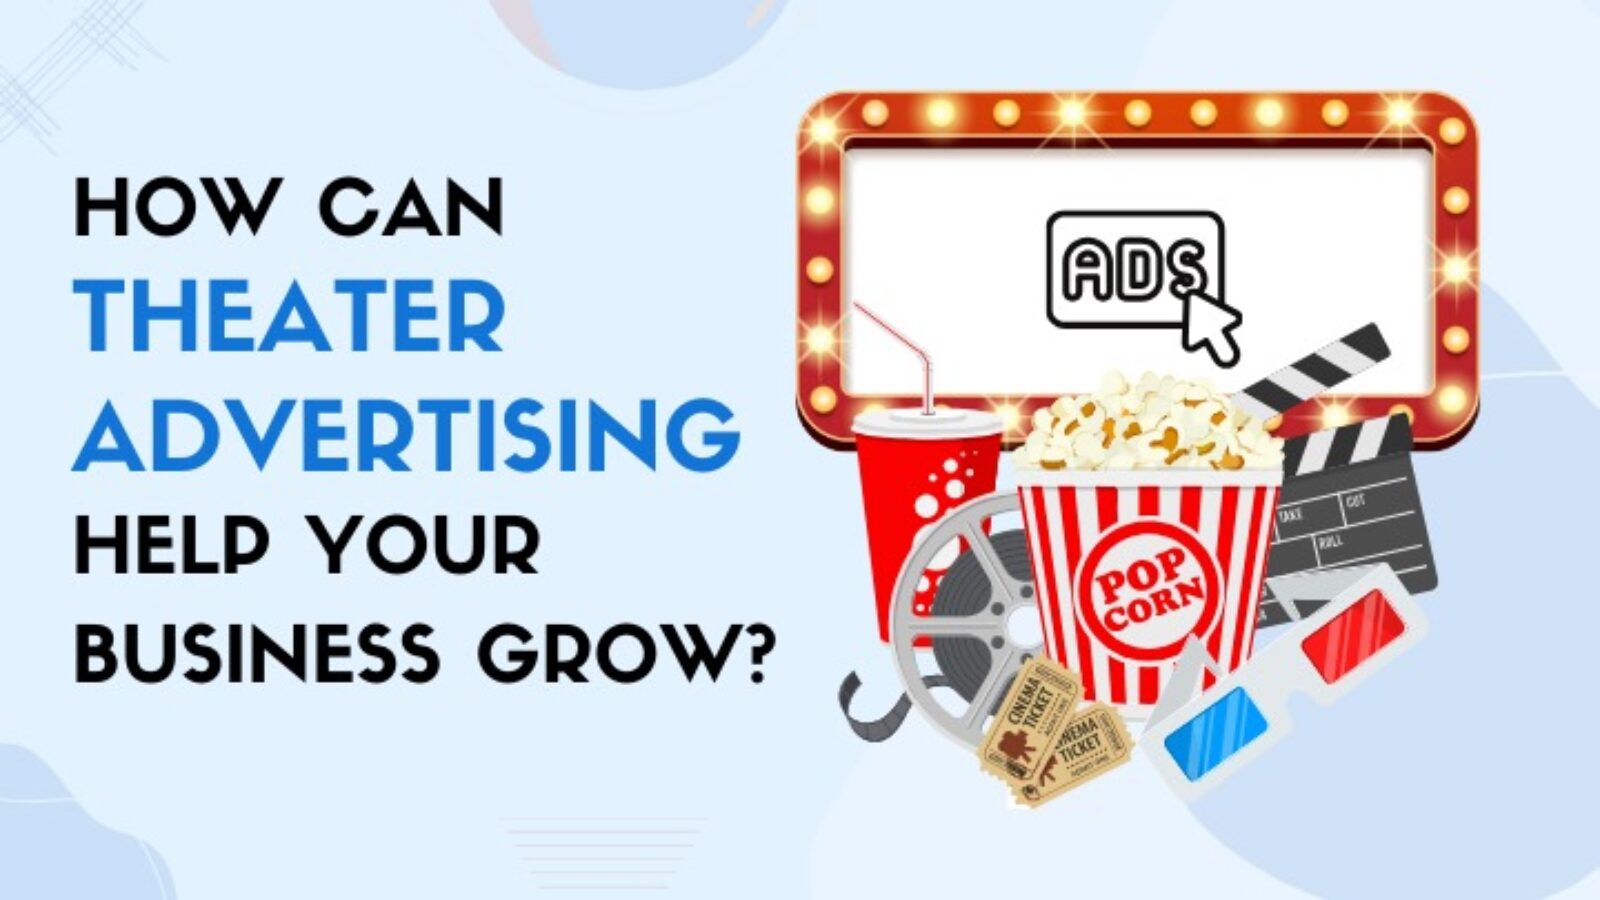 How can theatre advertising help your business grow?